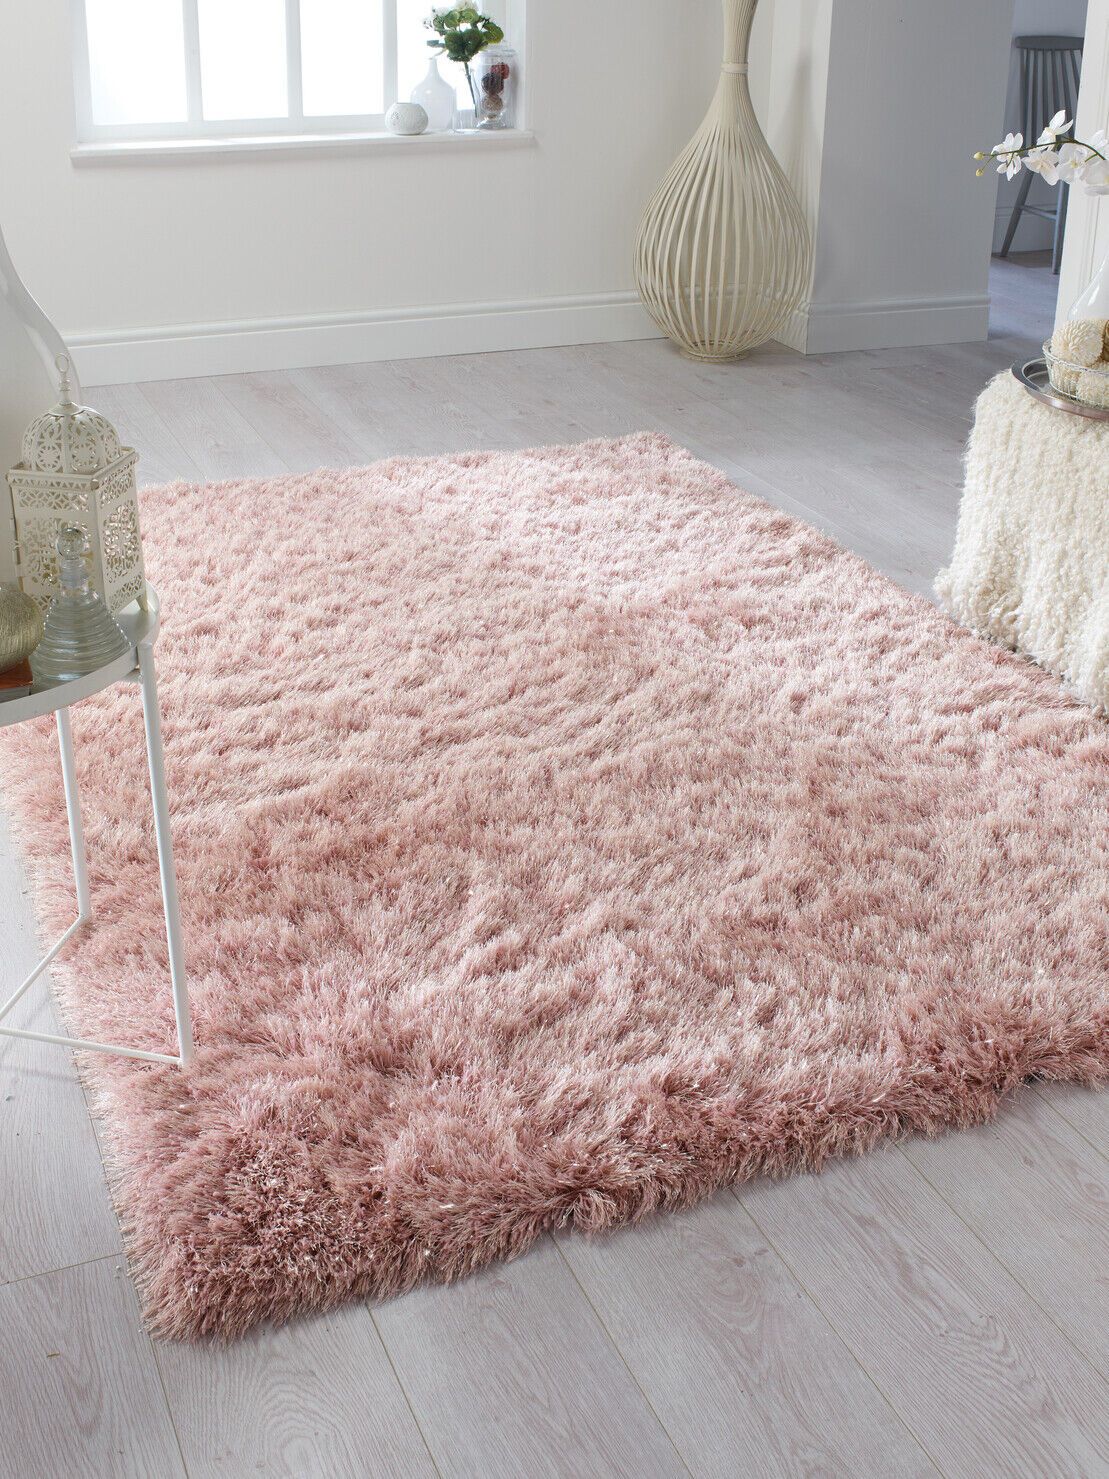 Dazzle Soft Fluffy Silky Shaggy Blush Pink Rug Bedroom Living Room Carpet |  Ebay Inside Pink Soft Touch Shag Rugs (View 11 of 15)